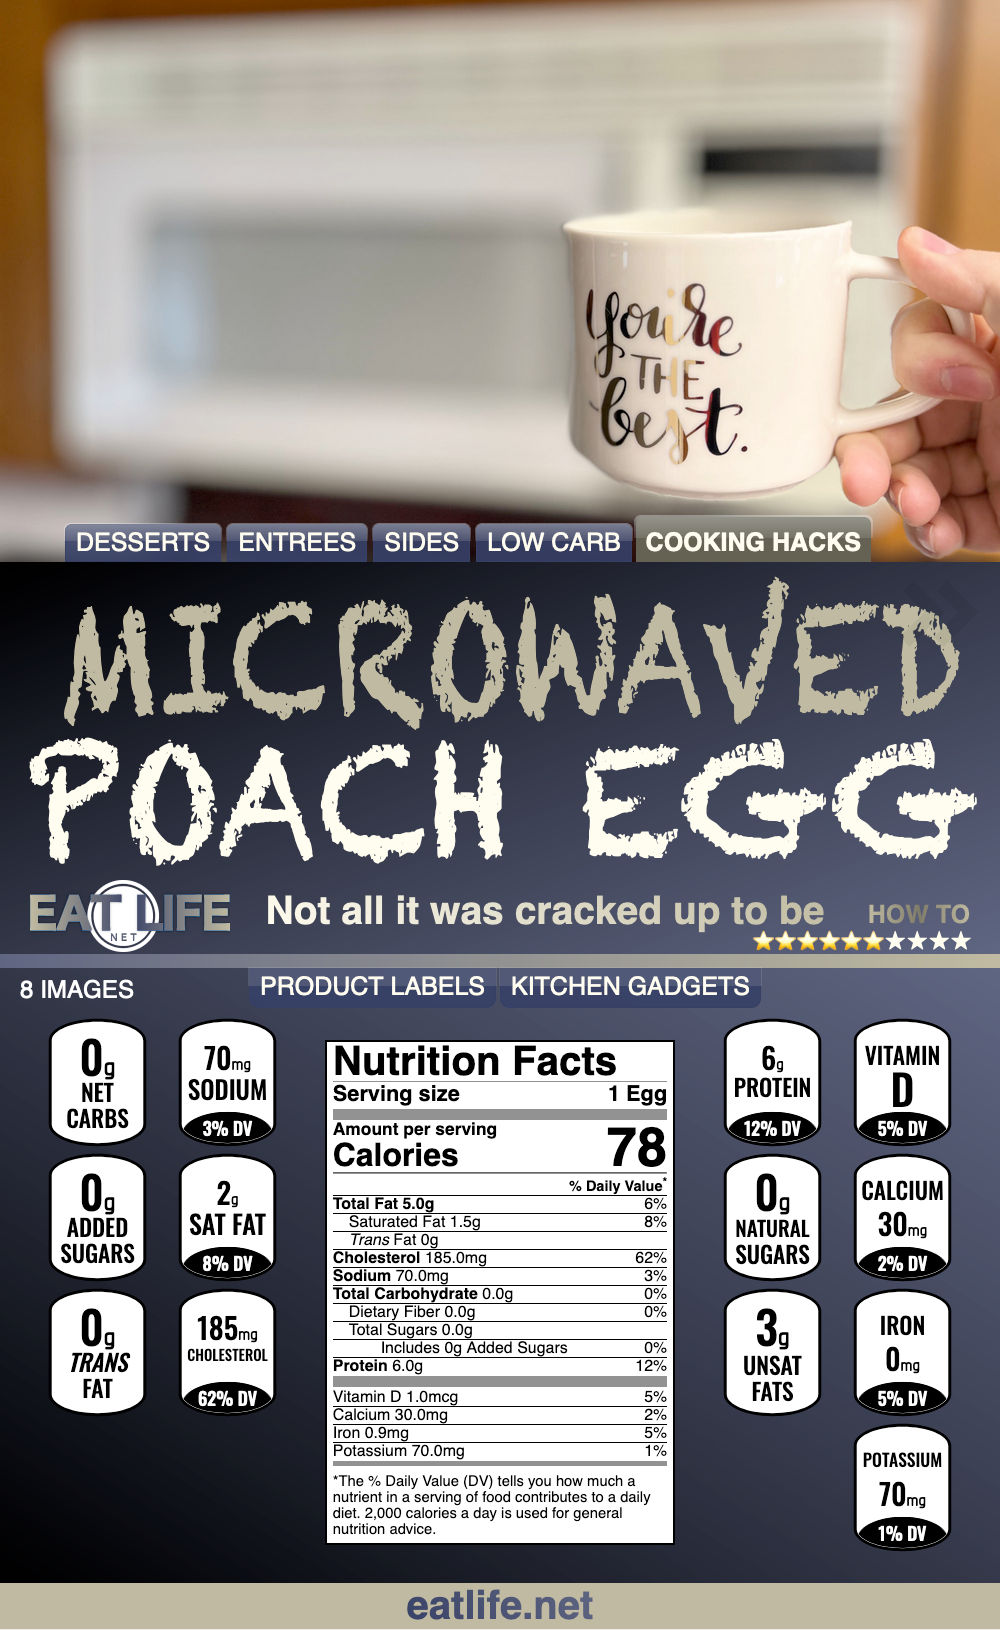 Poach Eggs in Microwave 